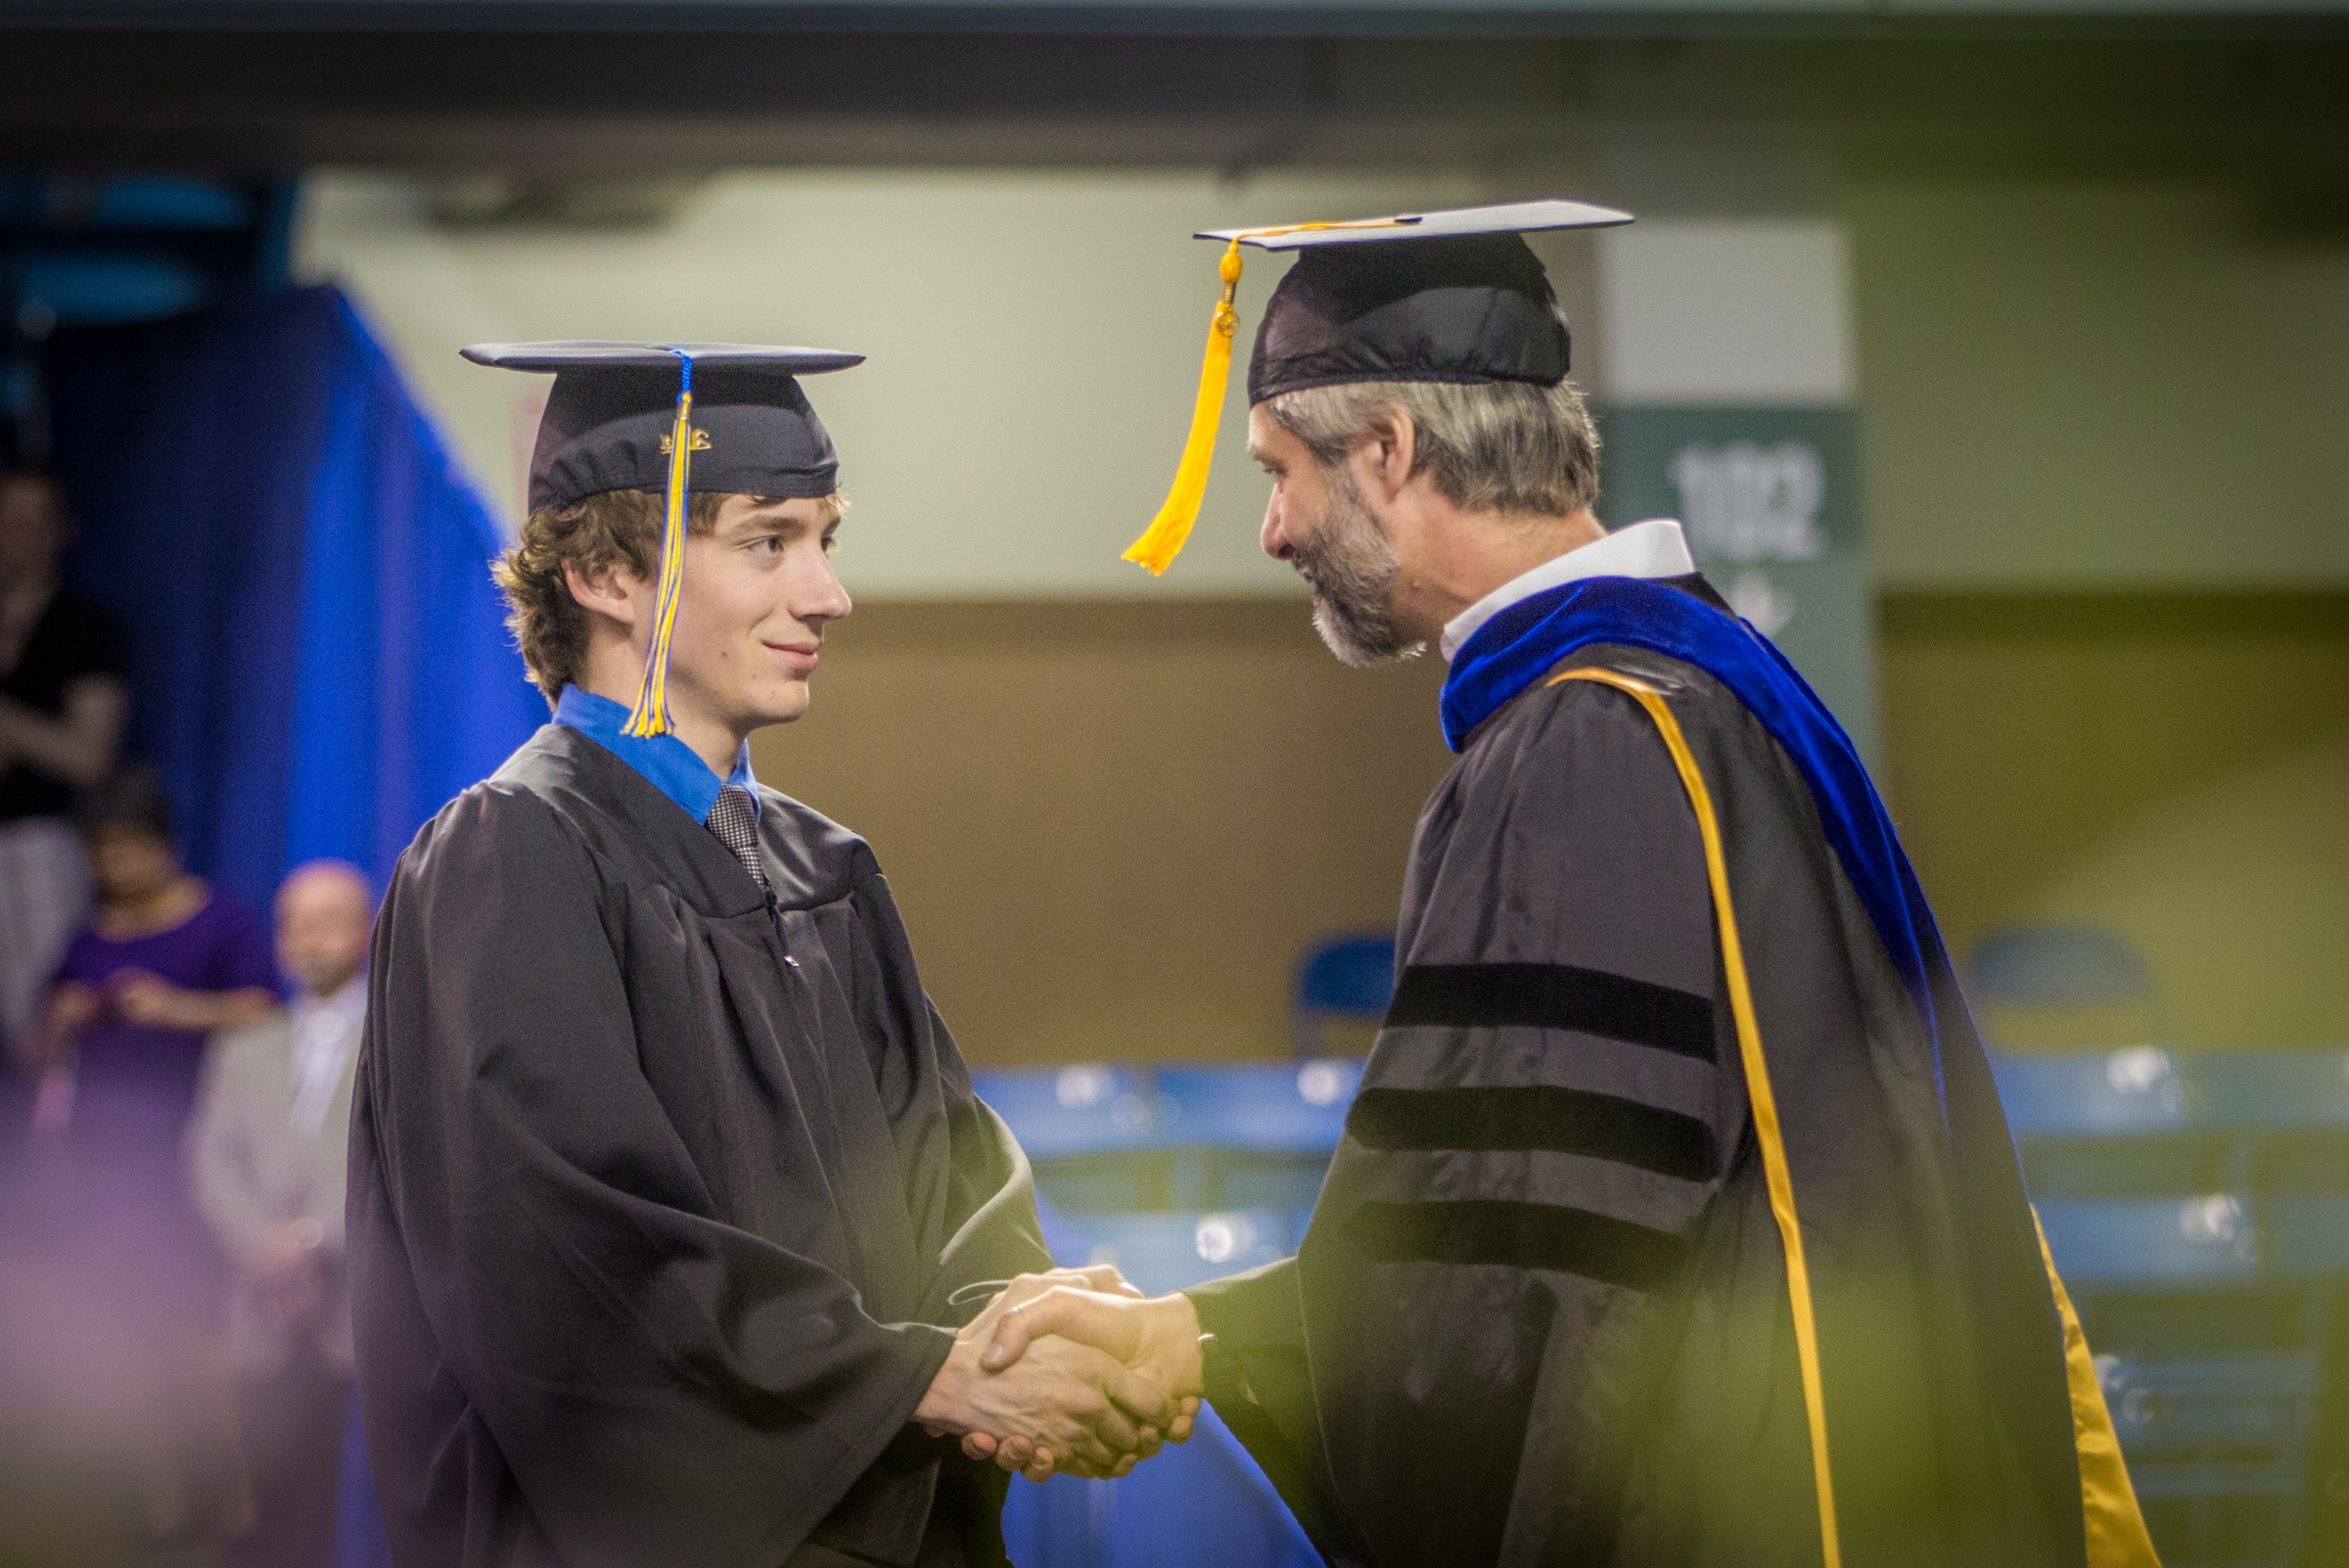 A UAF students shakes hands with a professor during the commencement ceremony.